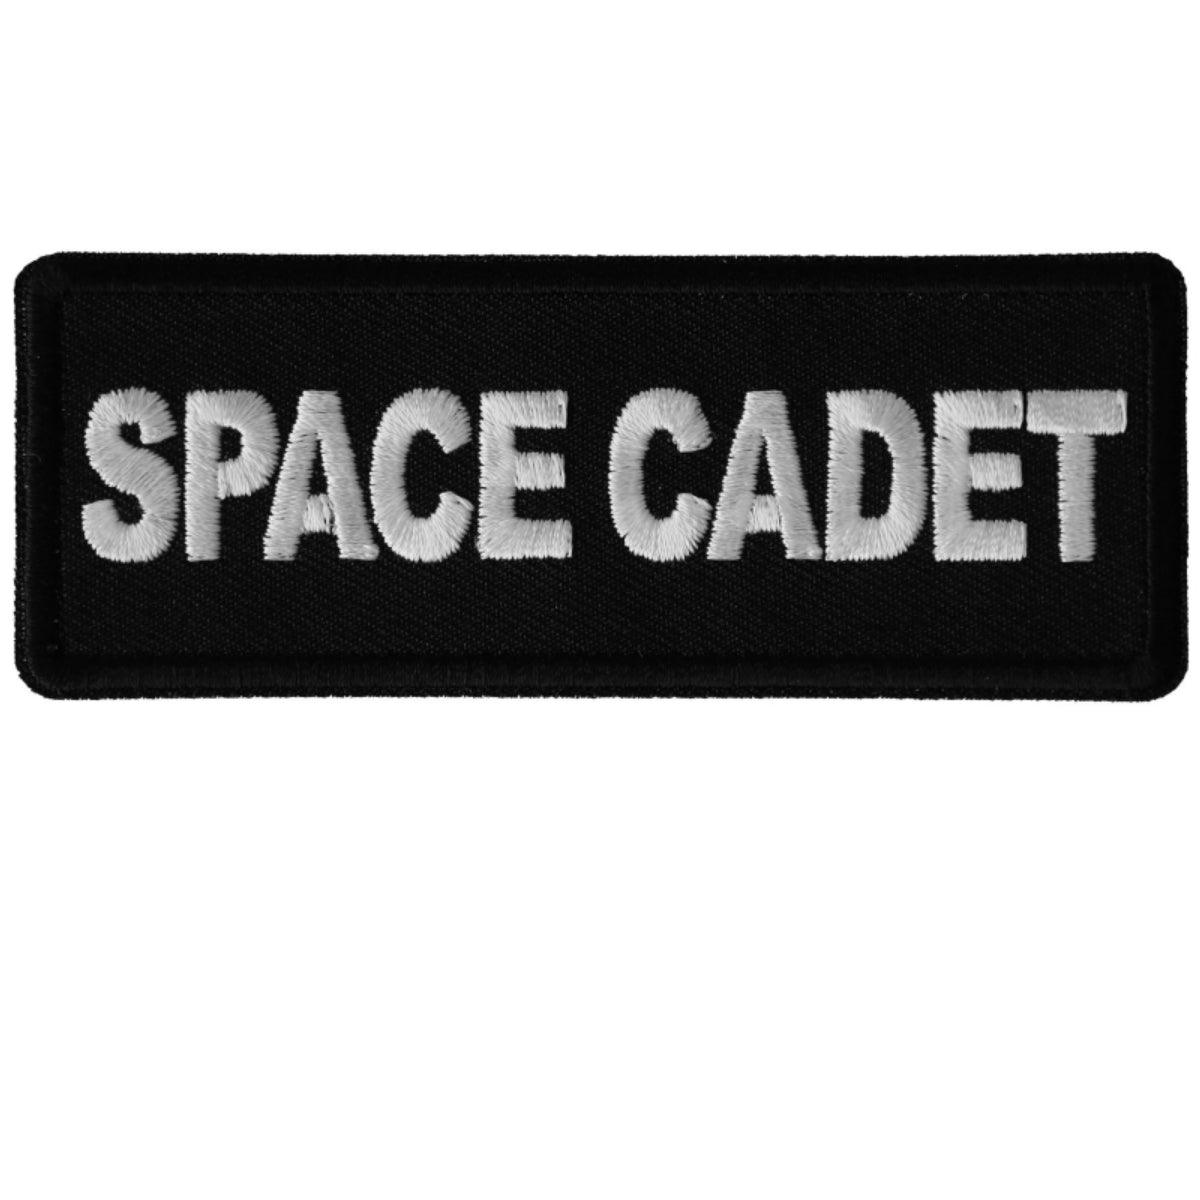 Daniel Smart Space Cadet Embroidered Iron On Patch, 4 x 1.5 inches - American Legend Rider